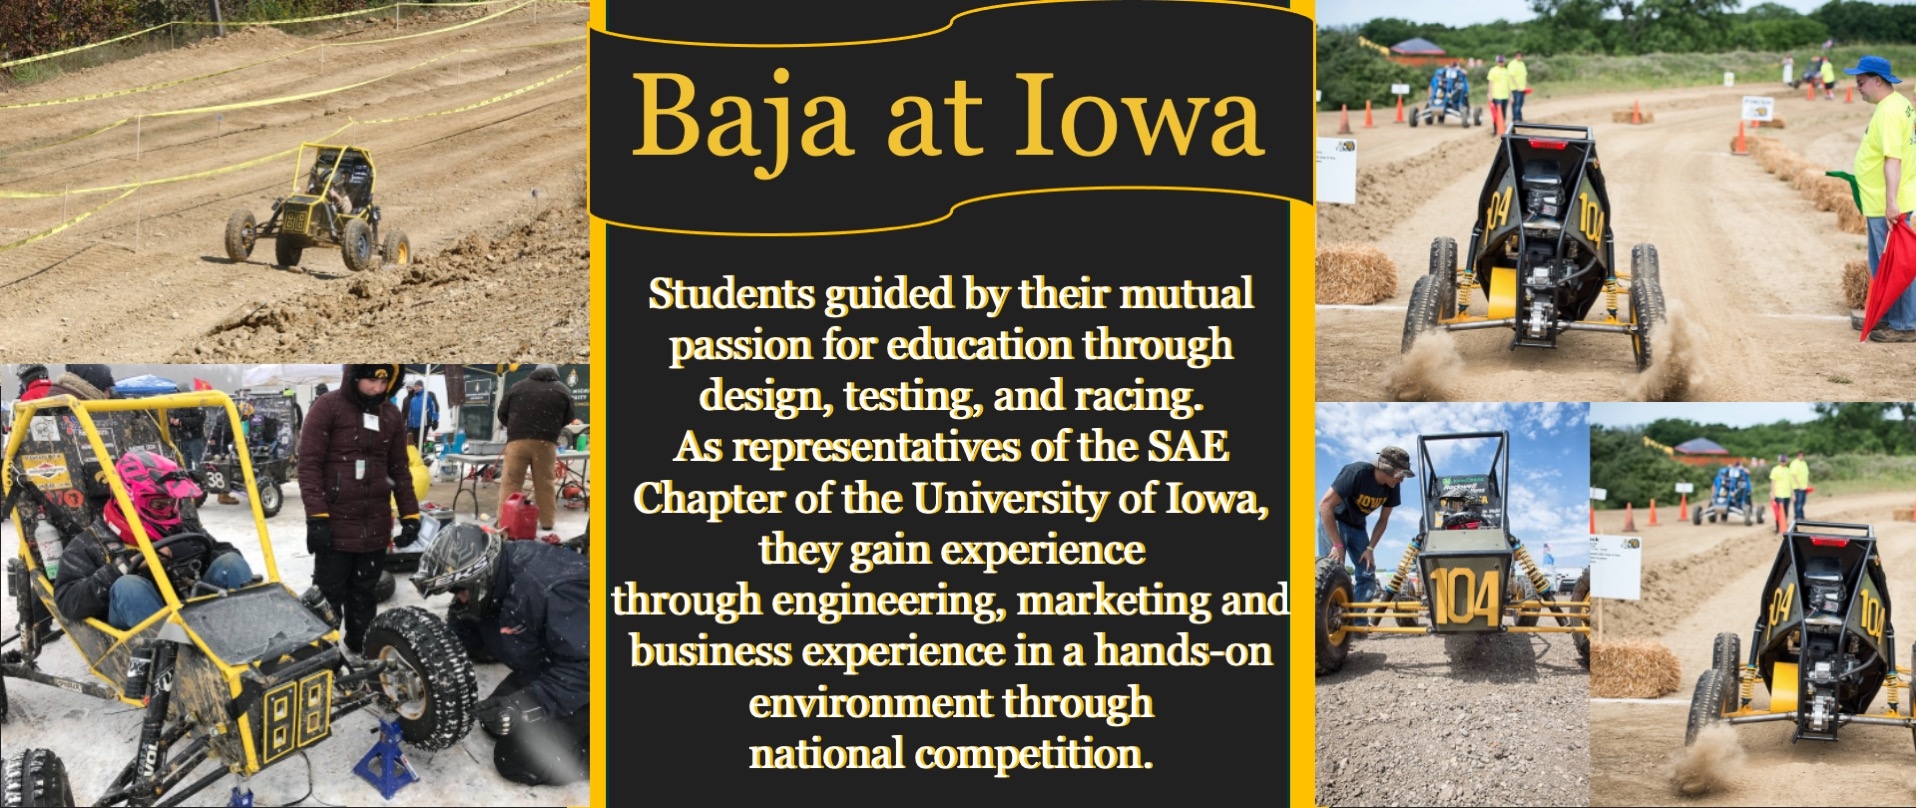 Iowa Baja; We are students from the University of Iowa, guided by our mutual passion for education through design, testing, and racing. As representatives of the SAE Chapter of the University of Iowa, we gain experience through engineering, marketing and business experience in a hands-on environment throughnational competition.